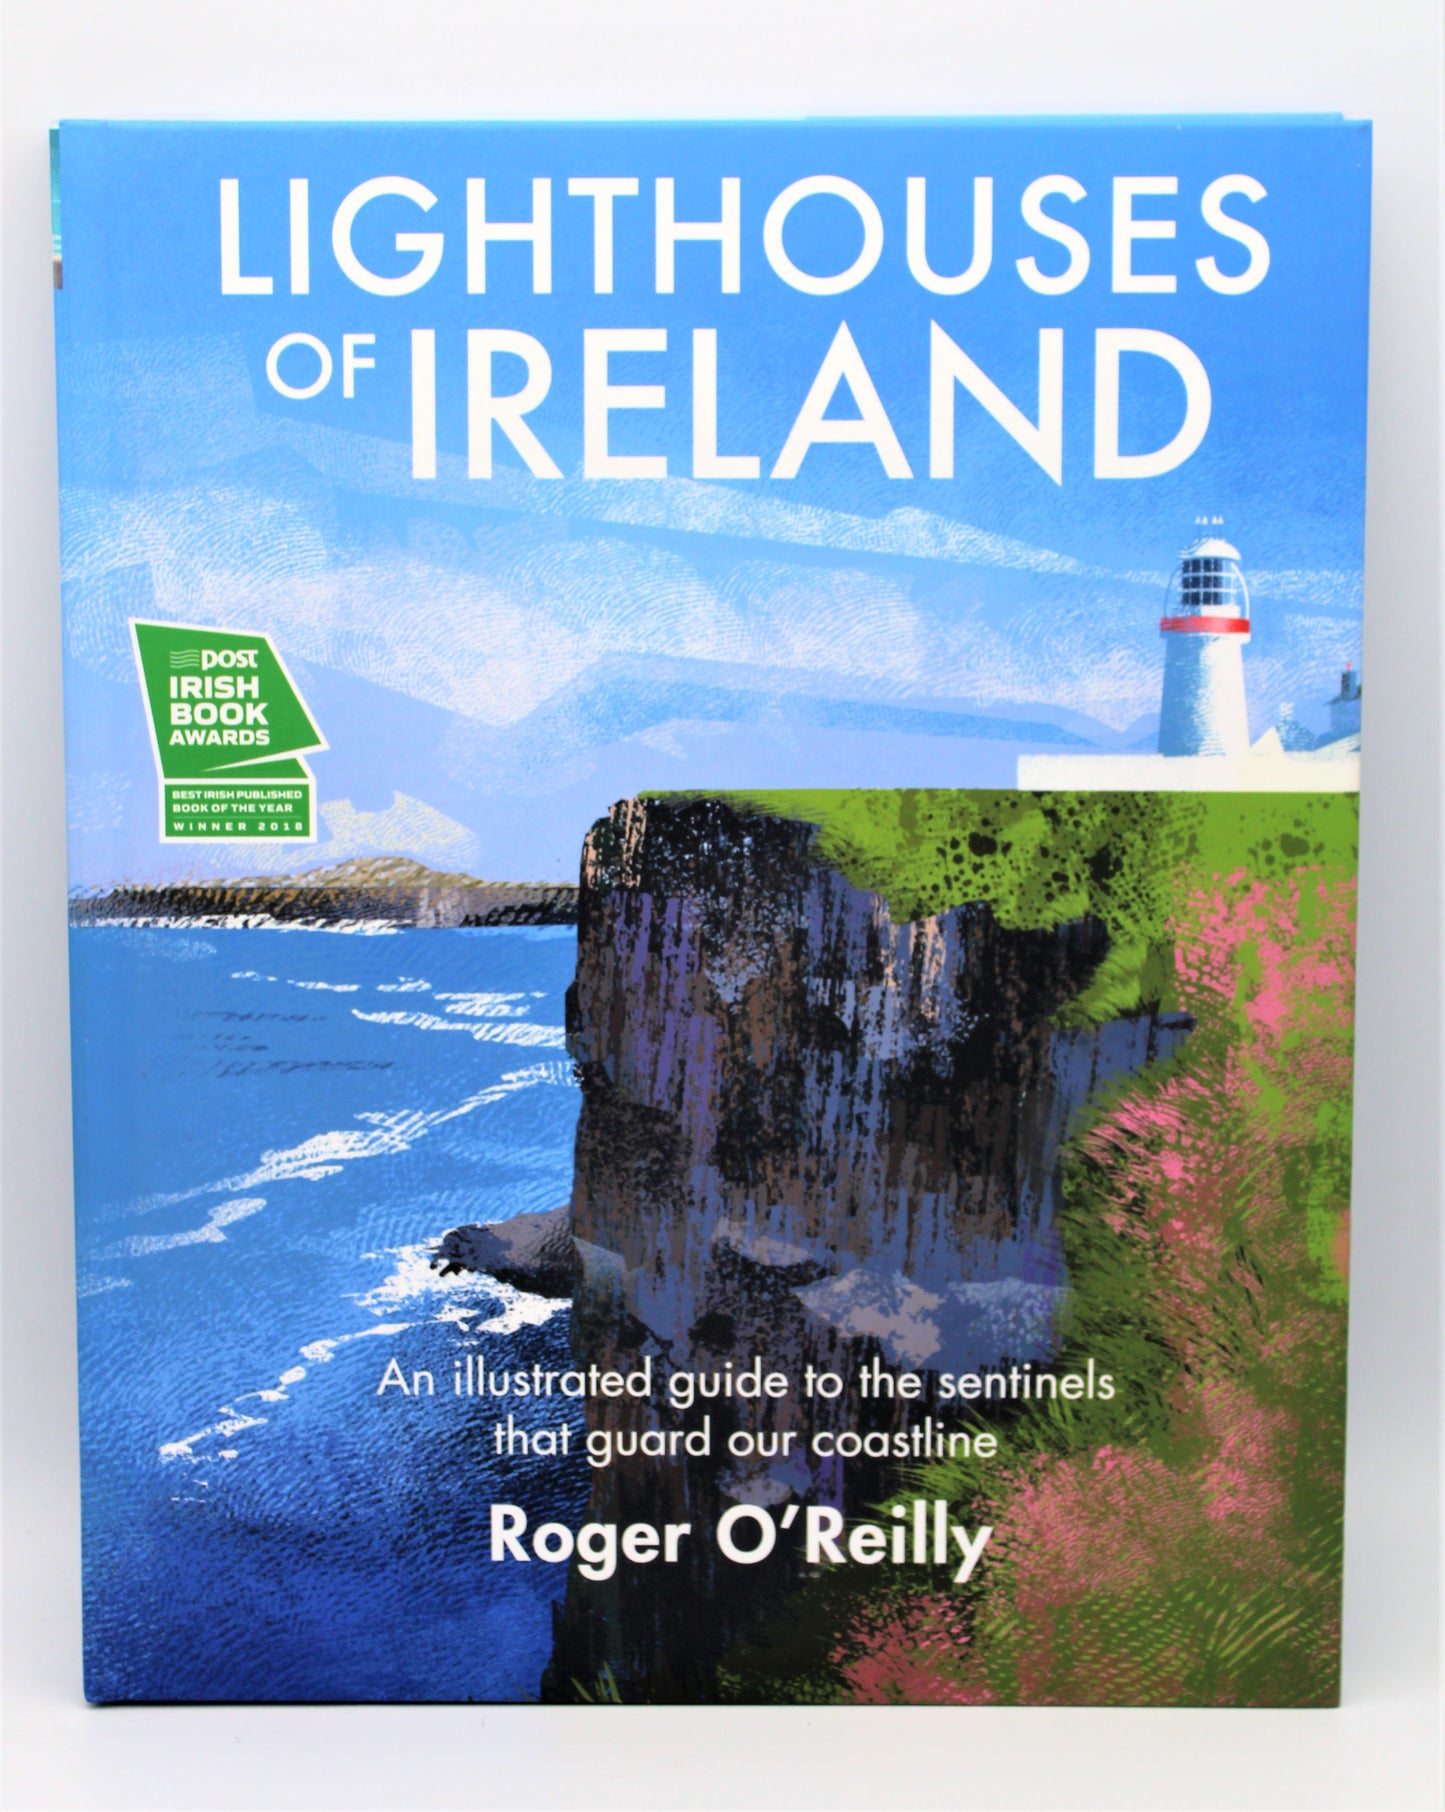 Lighthouses of Ireland: An Illustrated Guide to the Sentinels that Guard Our Coastline